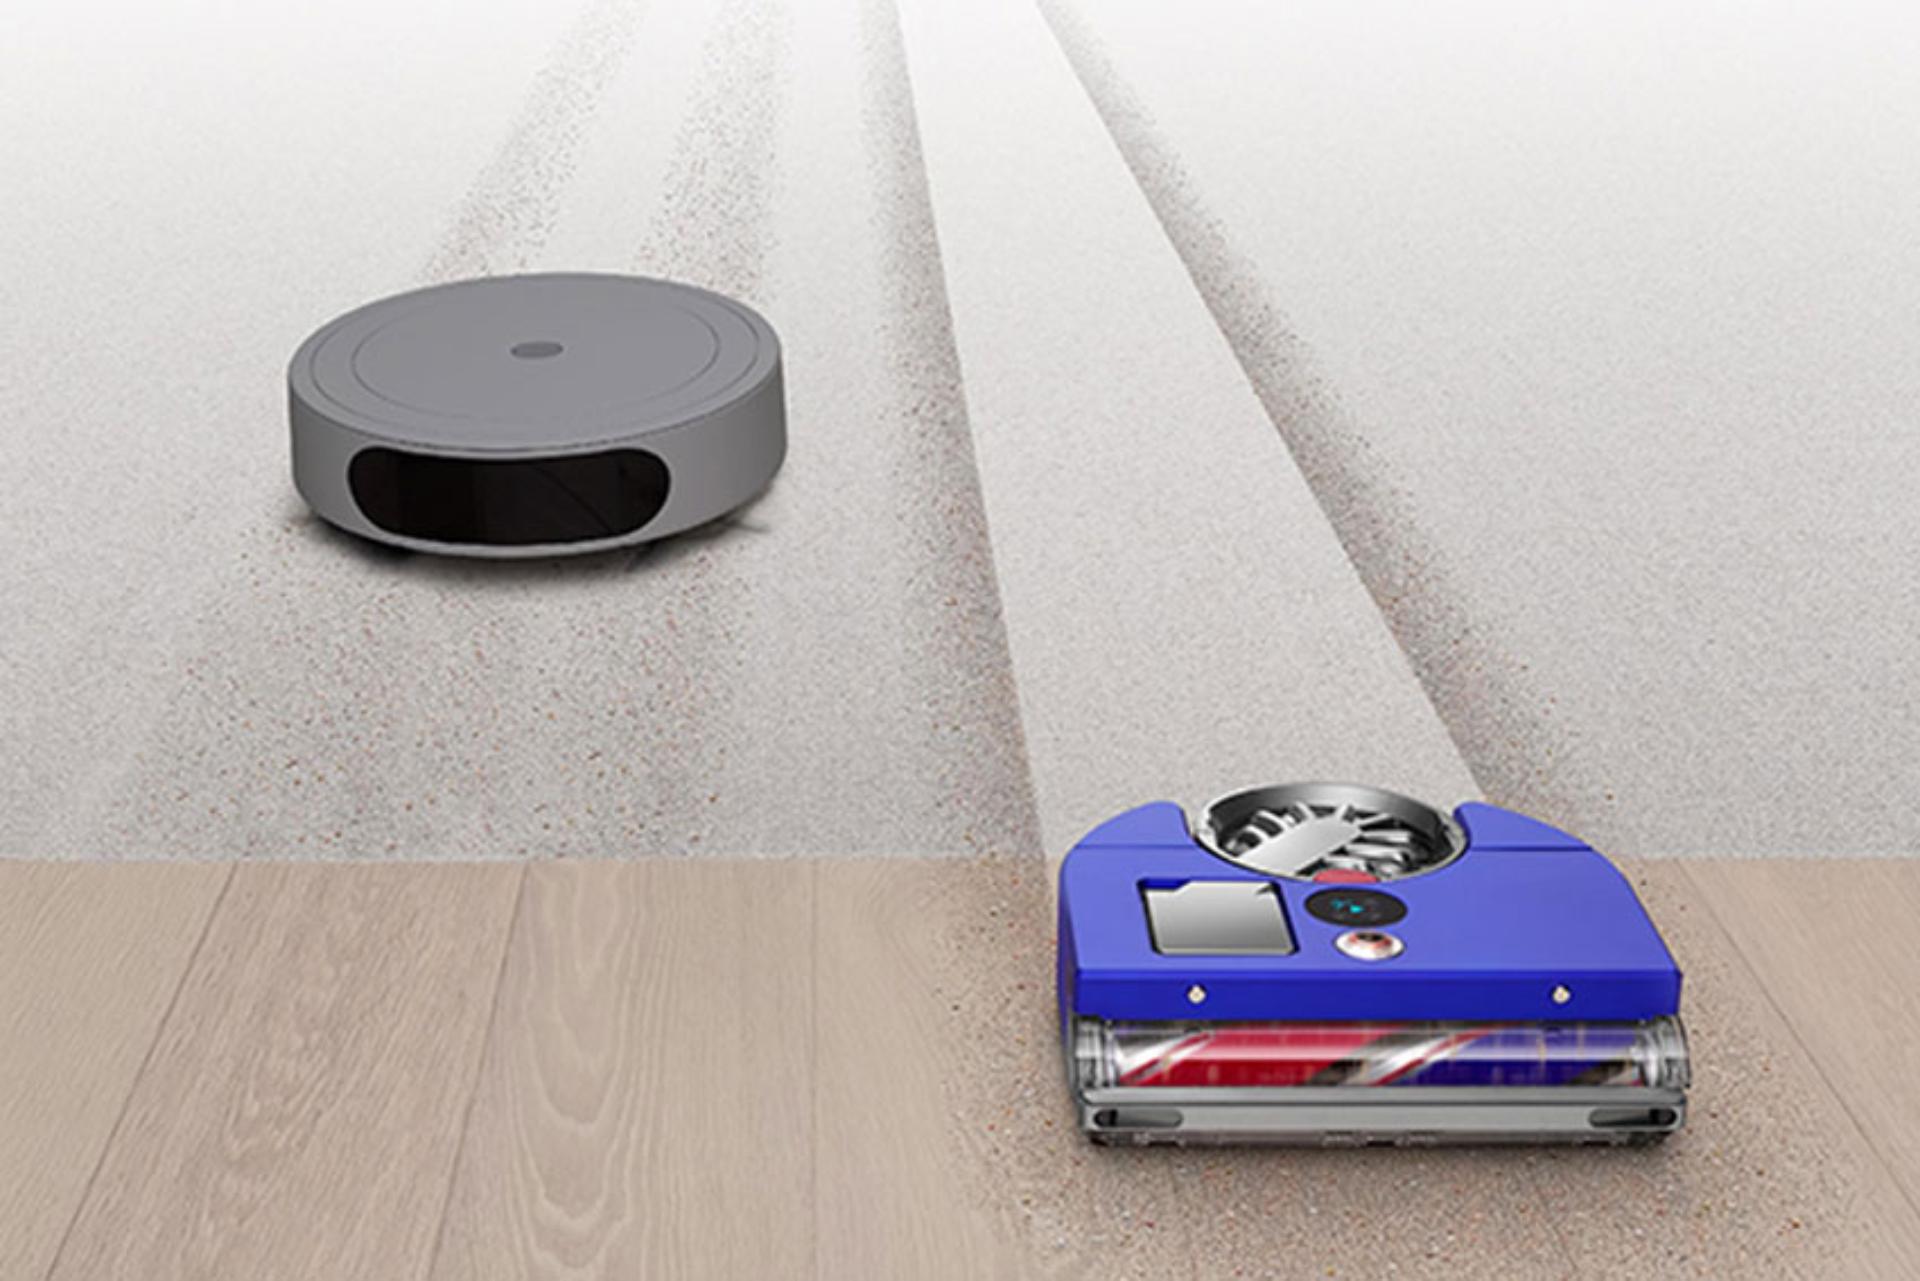 Dyson robot vacuum compared to other branded vacuum